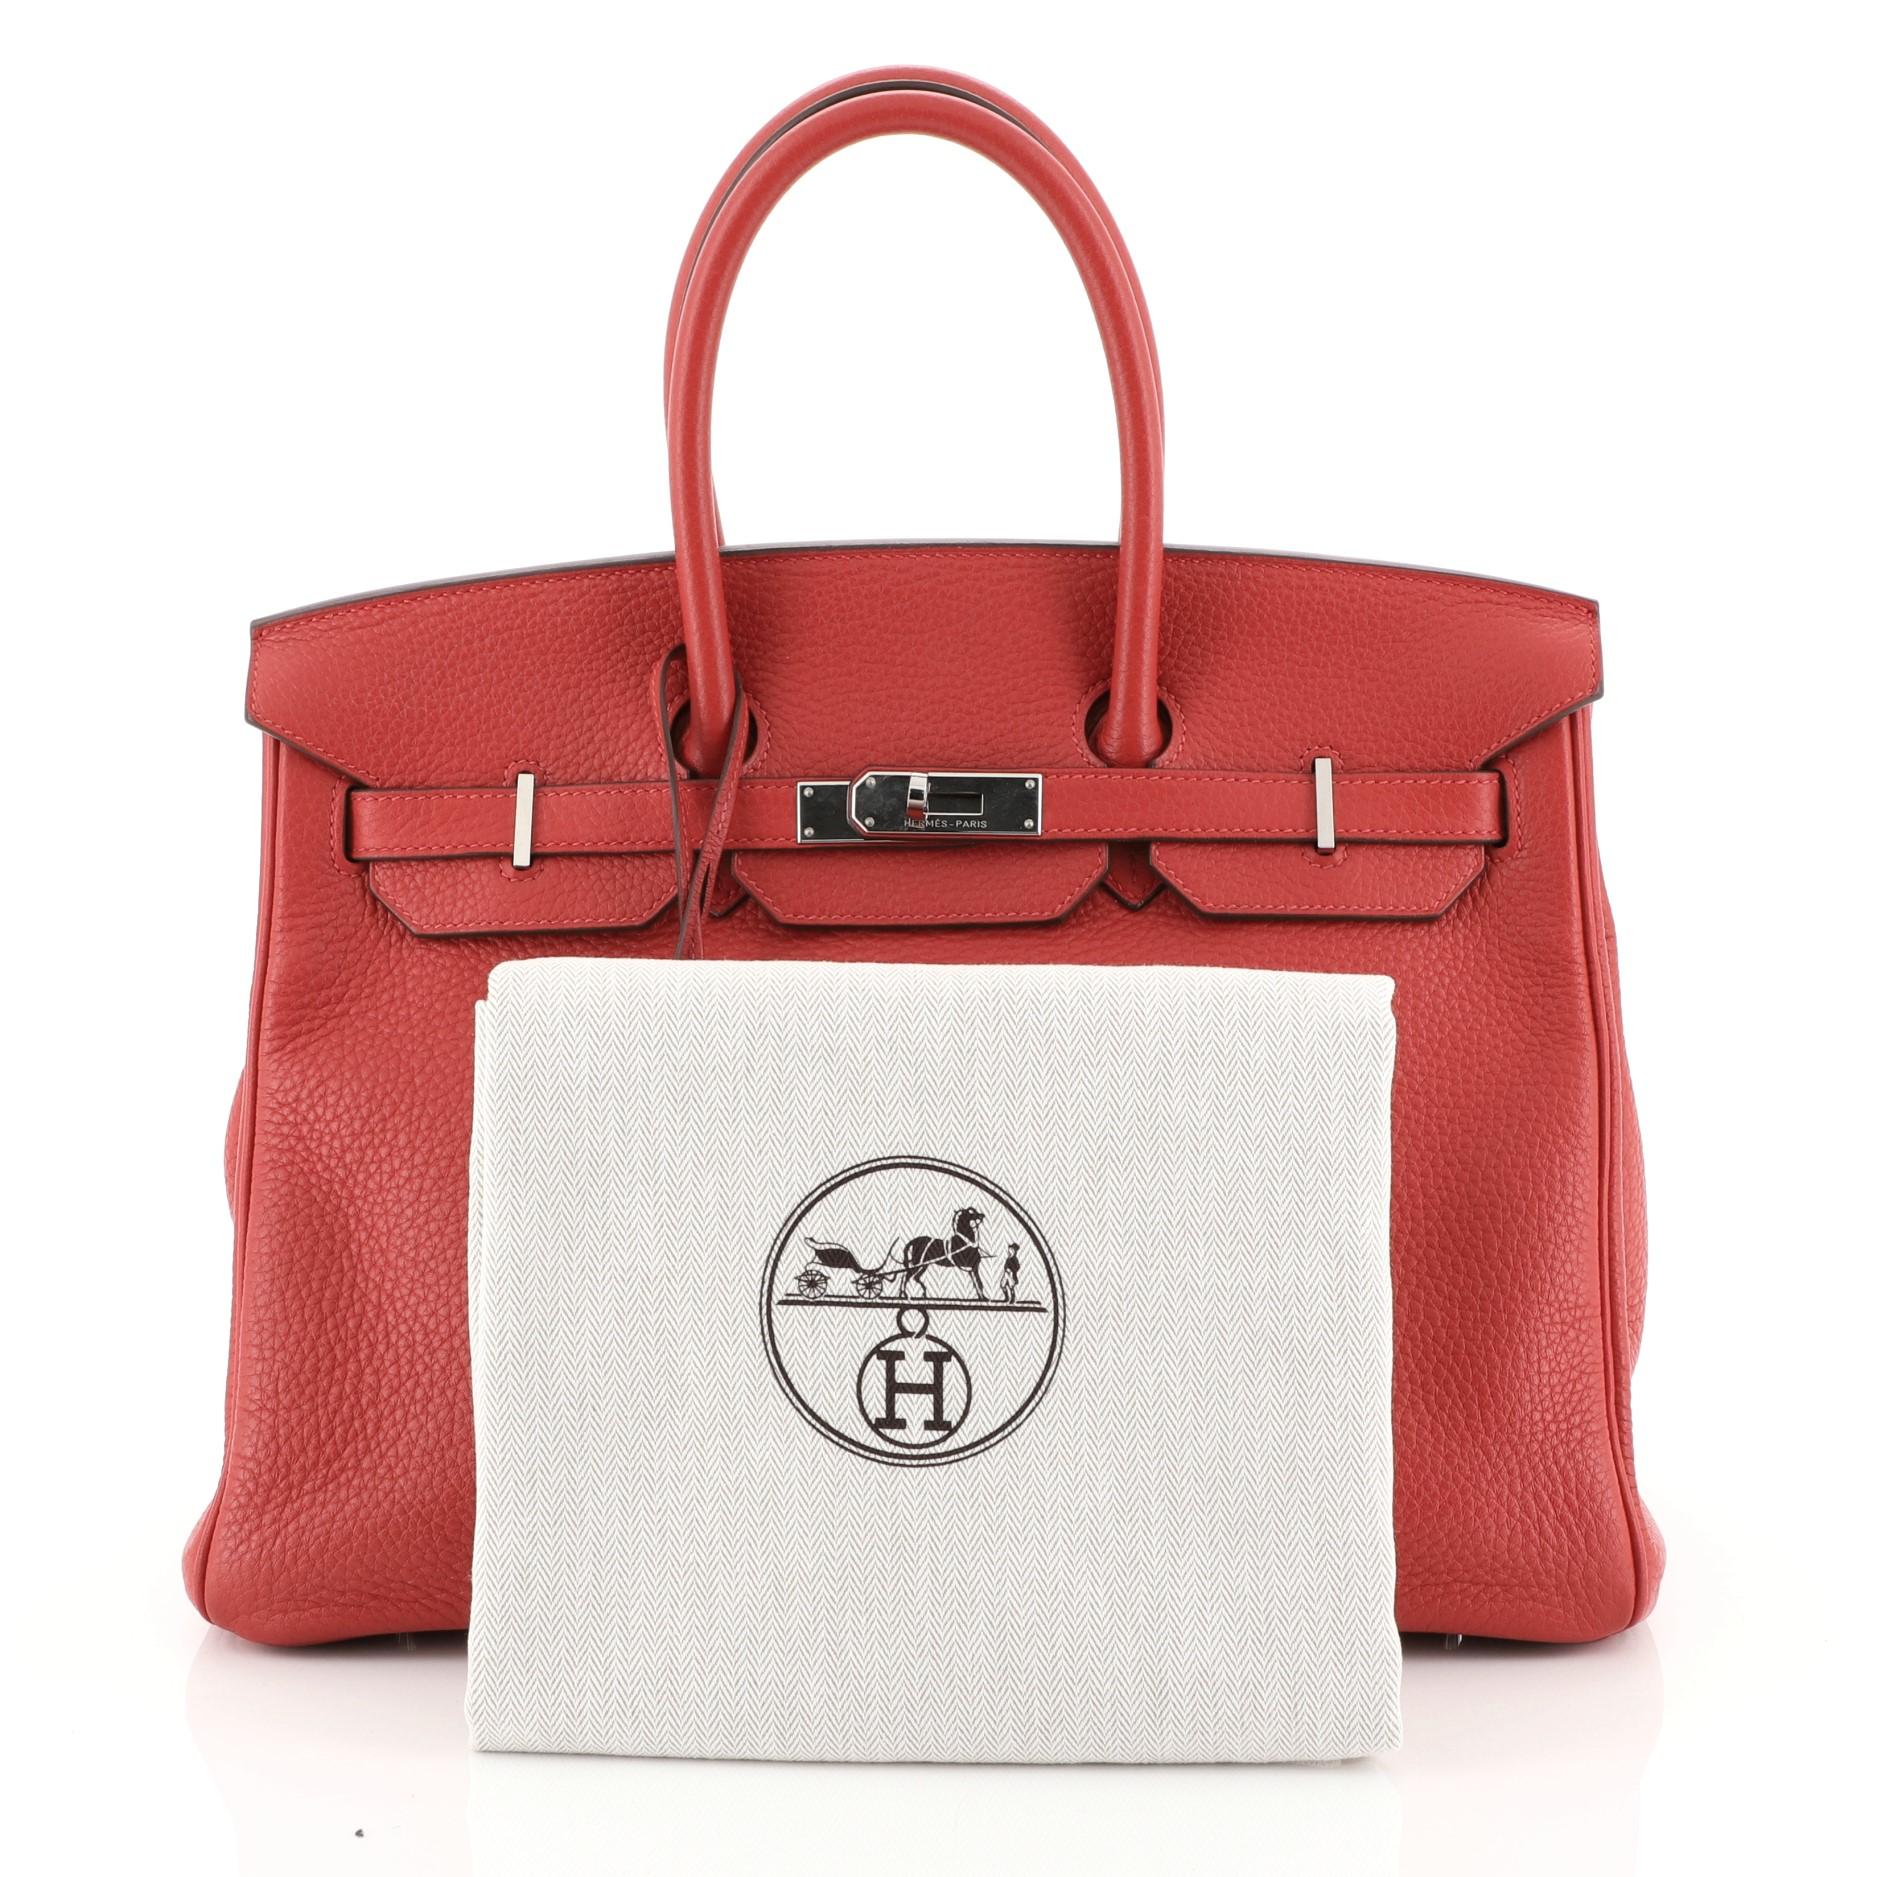 This Hermes Birkin Handbag Rouge Casaque Clemence with Palladium Hardware 35, crafted in Rouge Casaque red Clemence leather, features dual rolled handles, frontal flap, and palladium hardware. Its turn-lock closure opens to a Rouge Casaque red